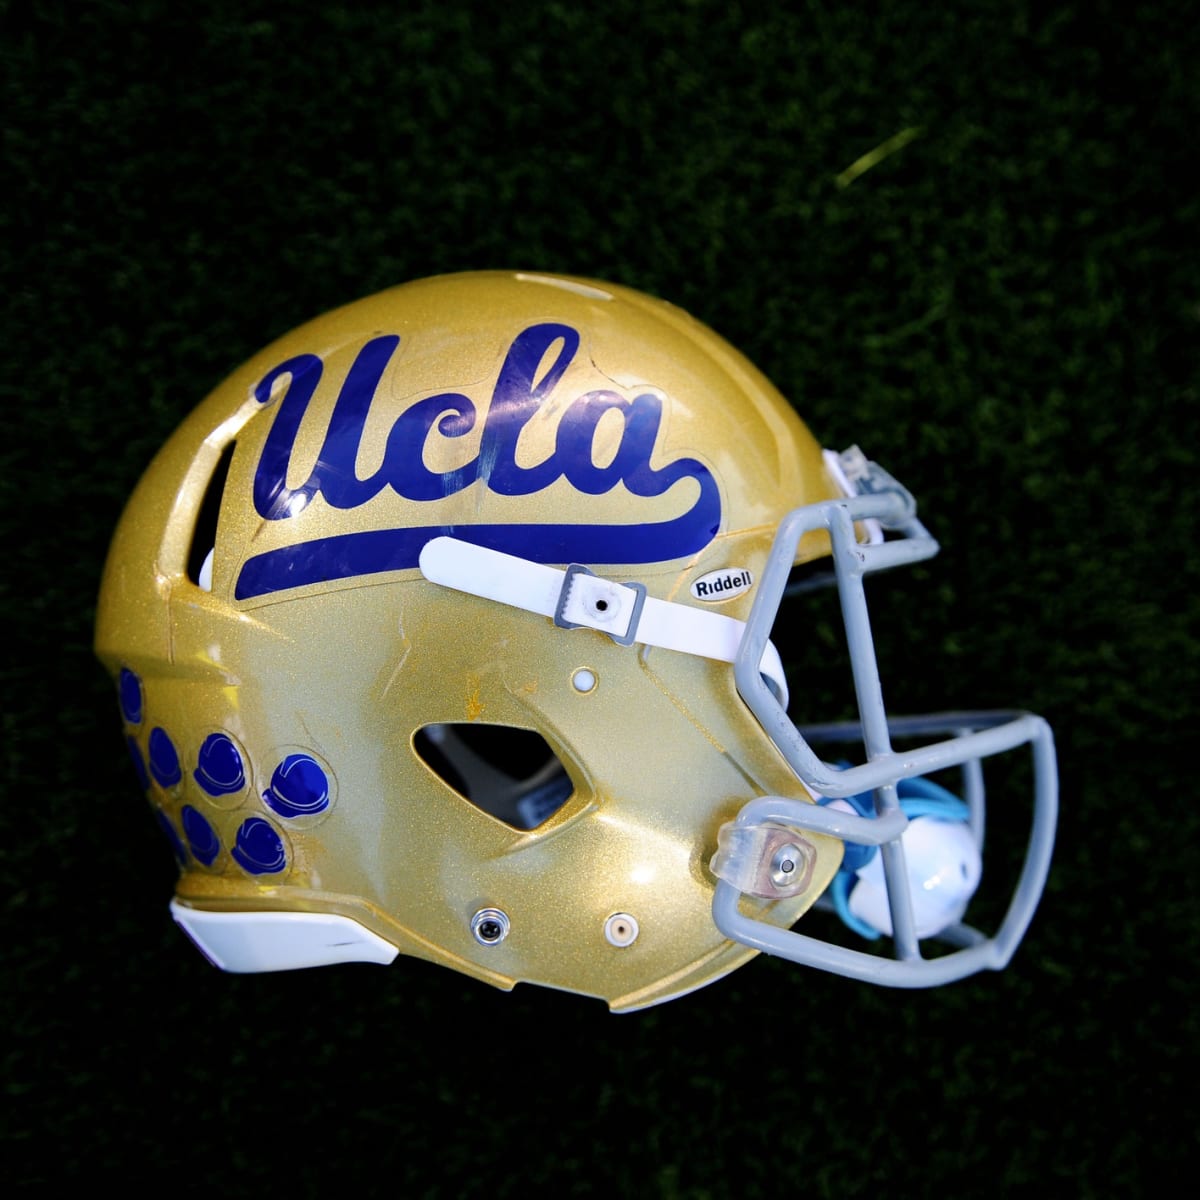 Millikan WR Ezavier Staples verbally commits to UCLA football - Sports  Illustrated High School News, Analysis and More